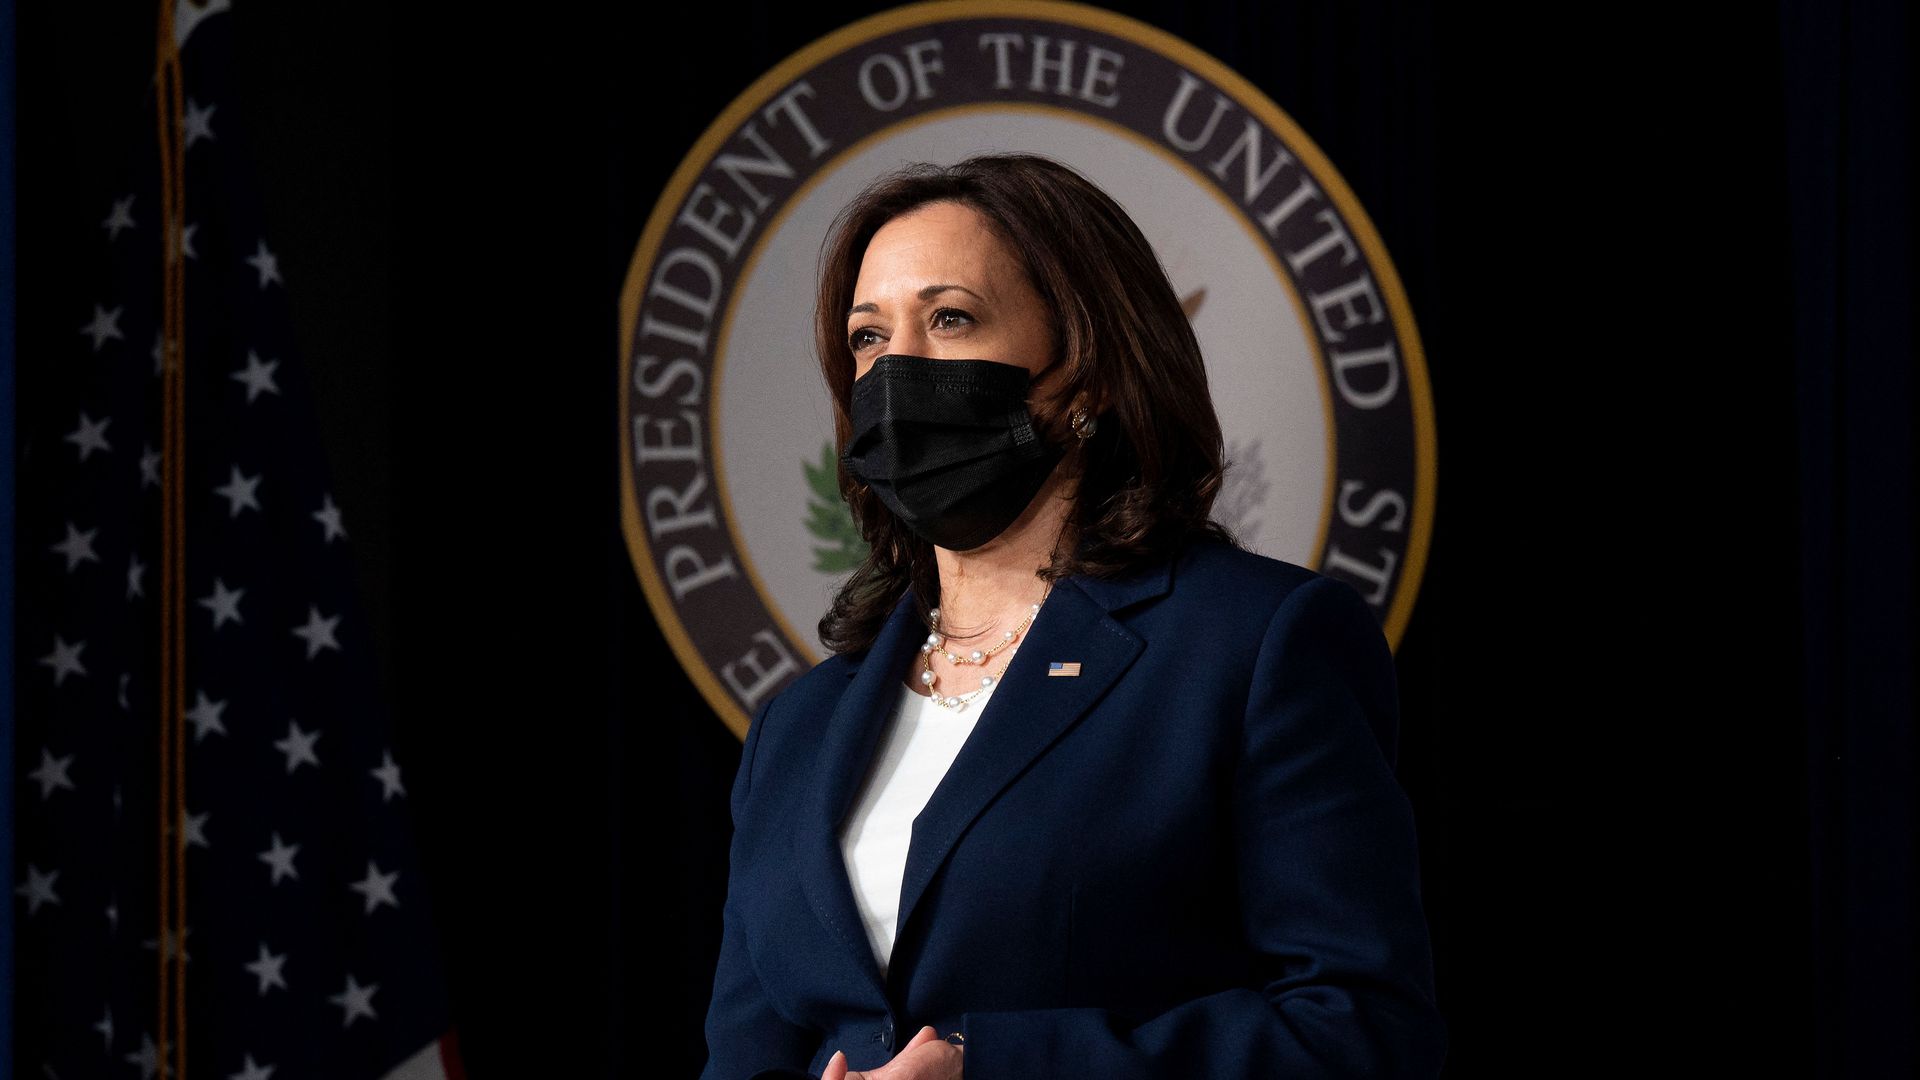 Kamala Harris stands on a stage wearing a black mask